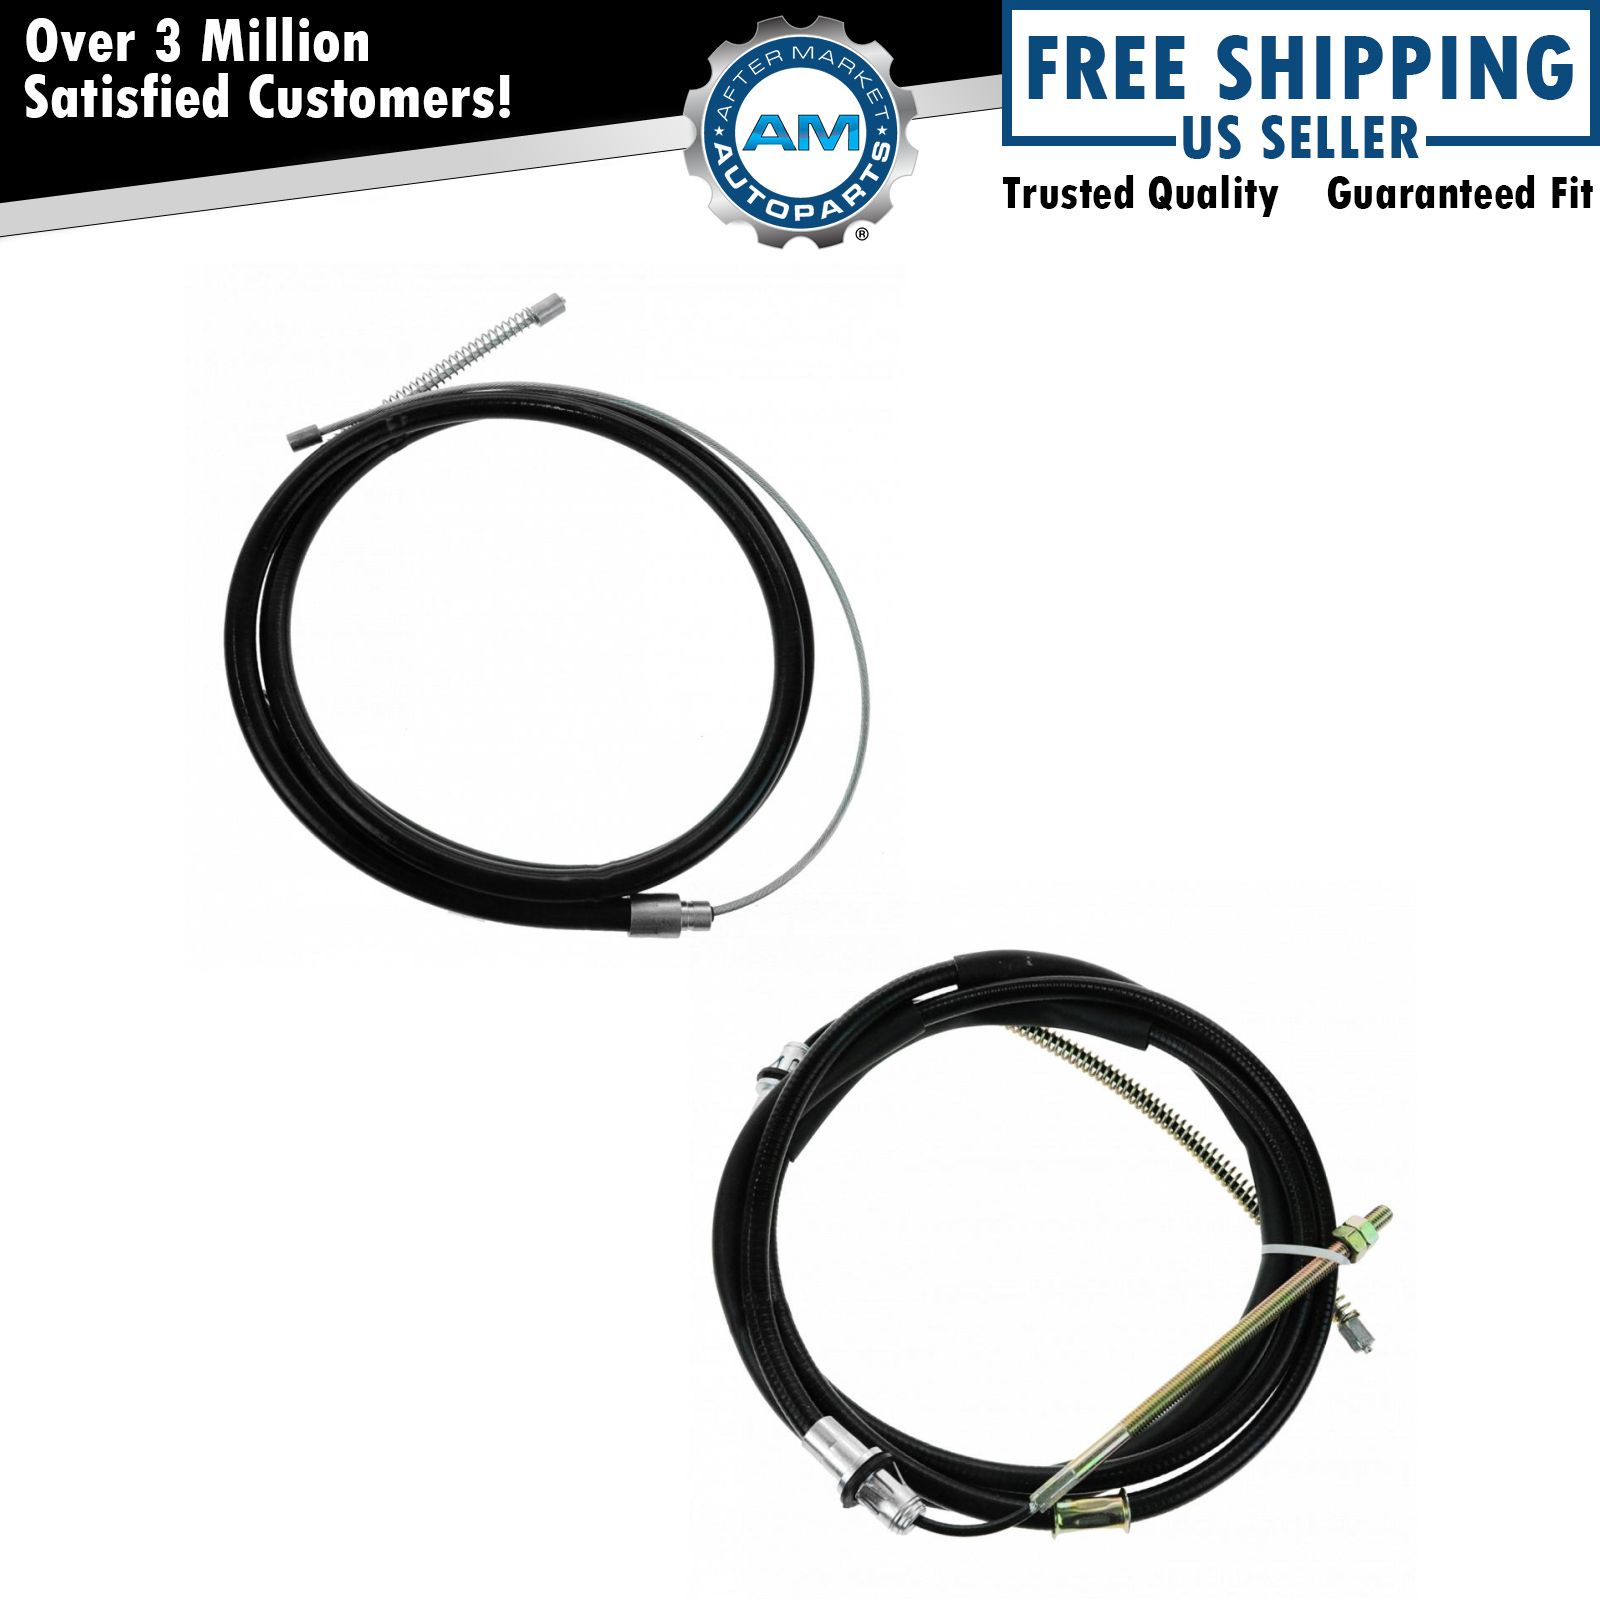 2pc Rear Parking Brake Cable Set LH & RH Sides for Chevy GMC C2500 K1500 K2500